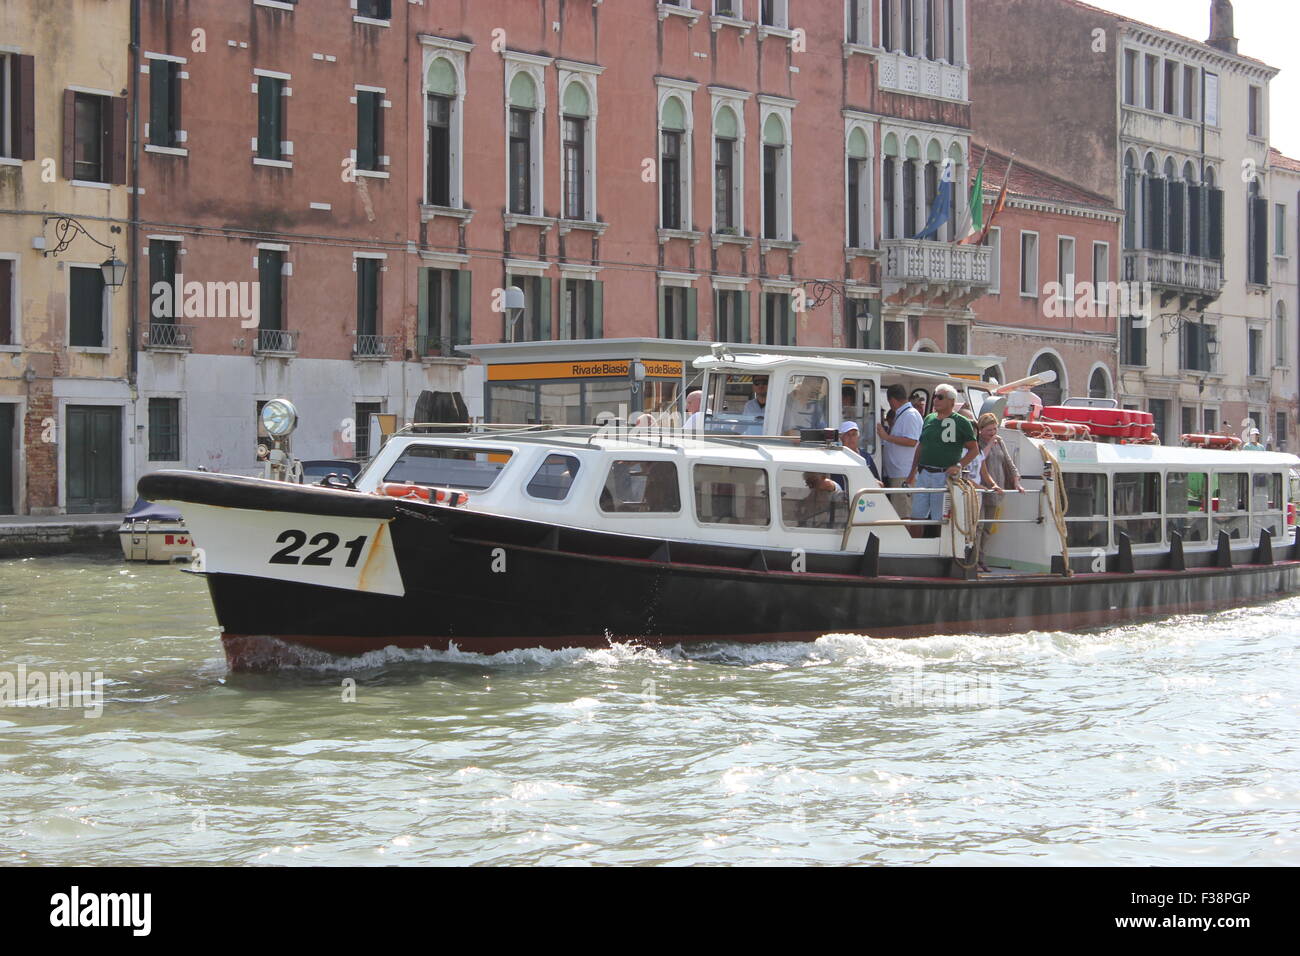 A river taxi takes tourists around in Venice, Italy Stock Photo